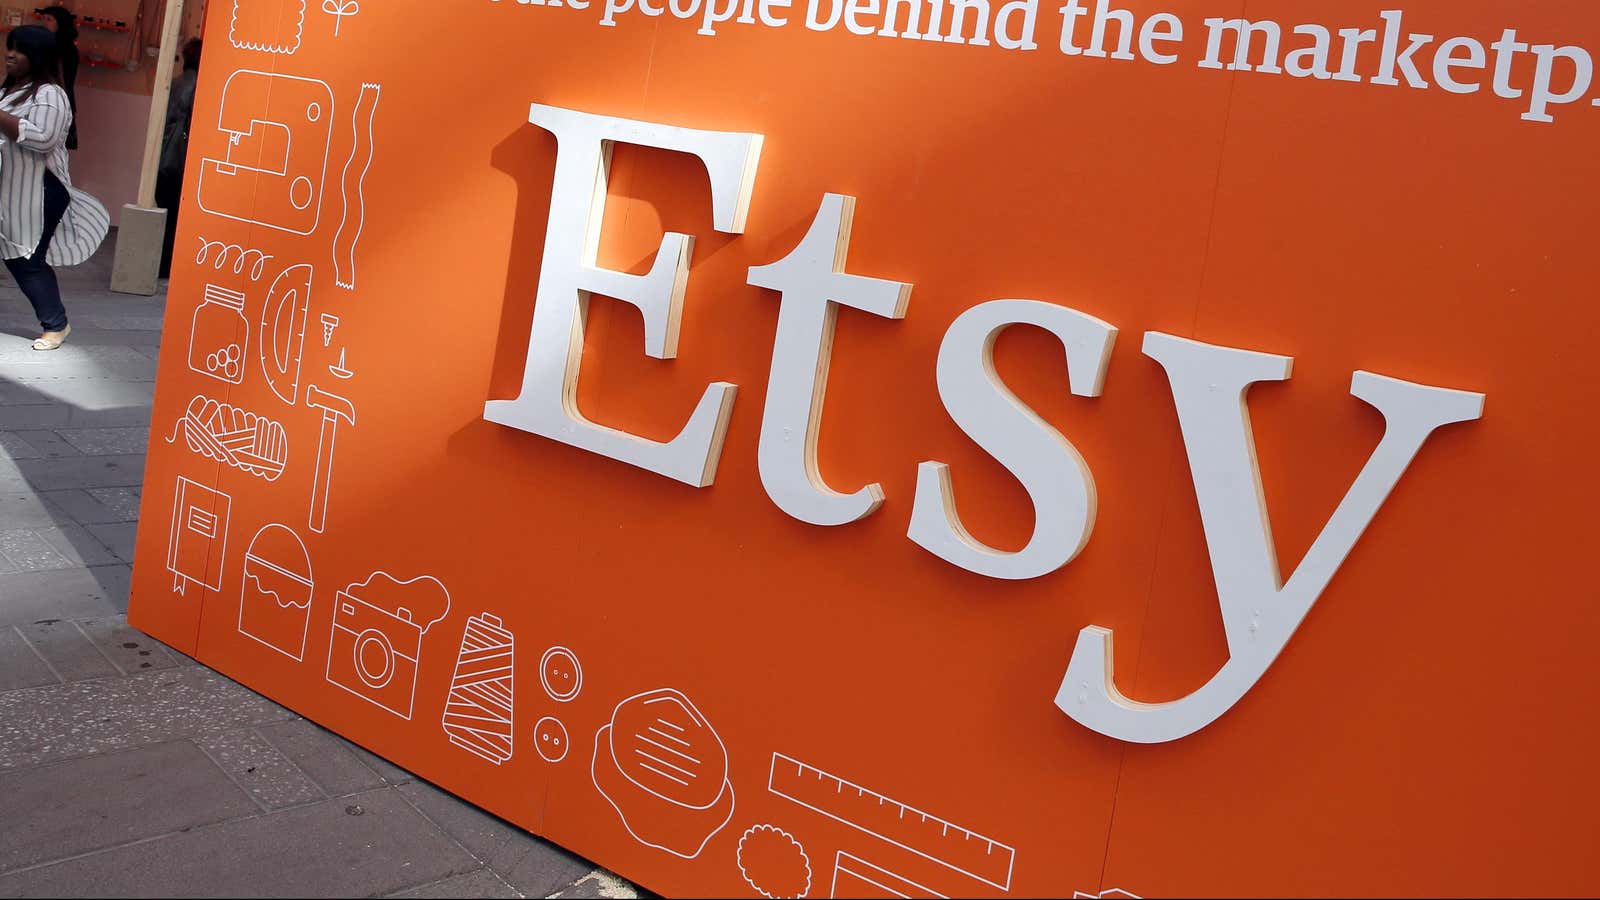 Etsy is pushing back against California’s proposed bill AB 3262, which Amazon says it would support under certain conditions.